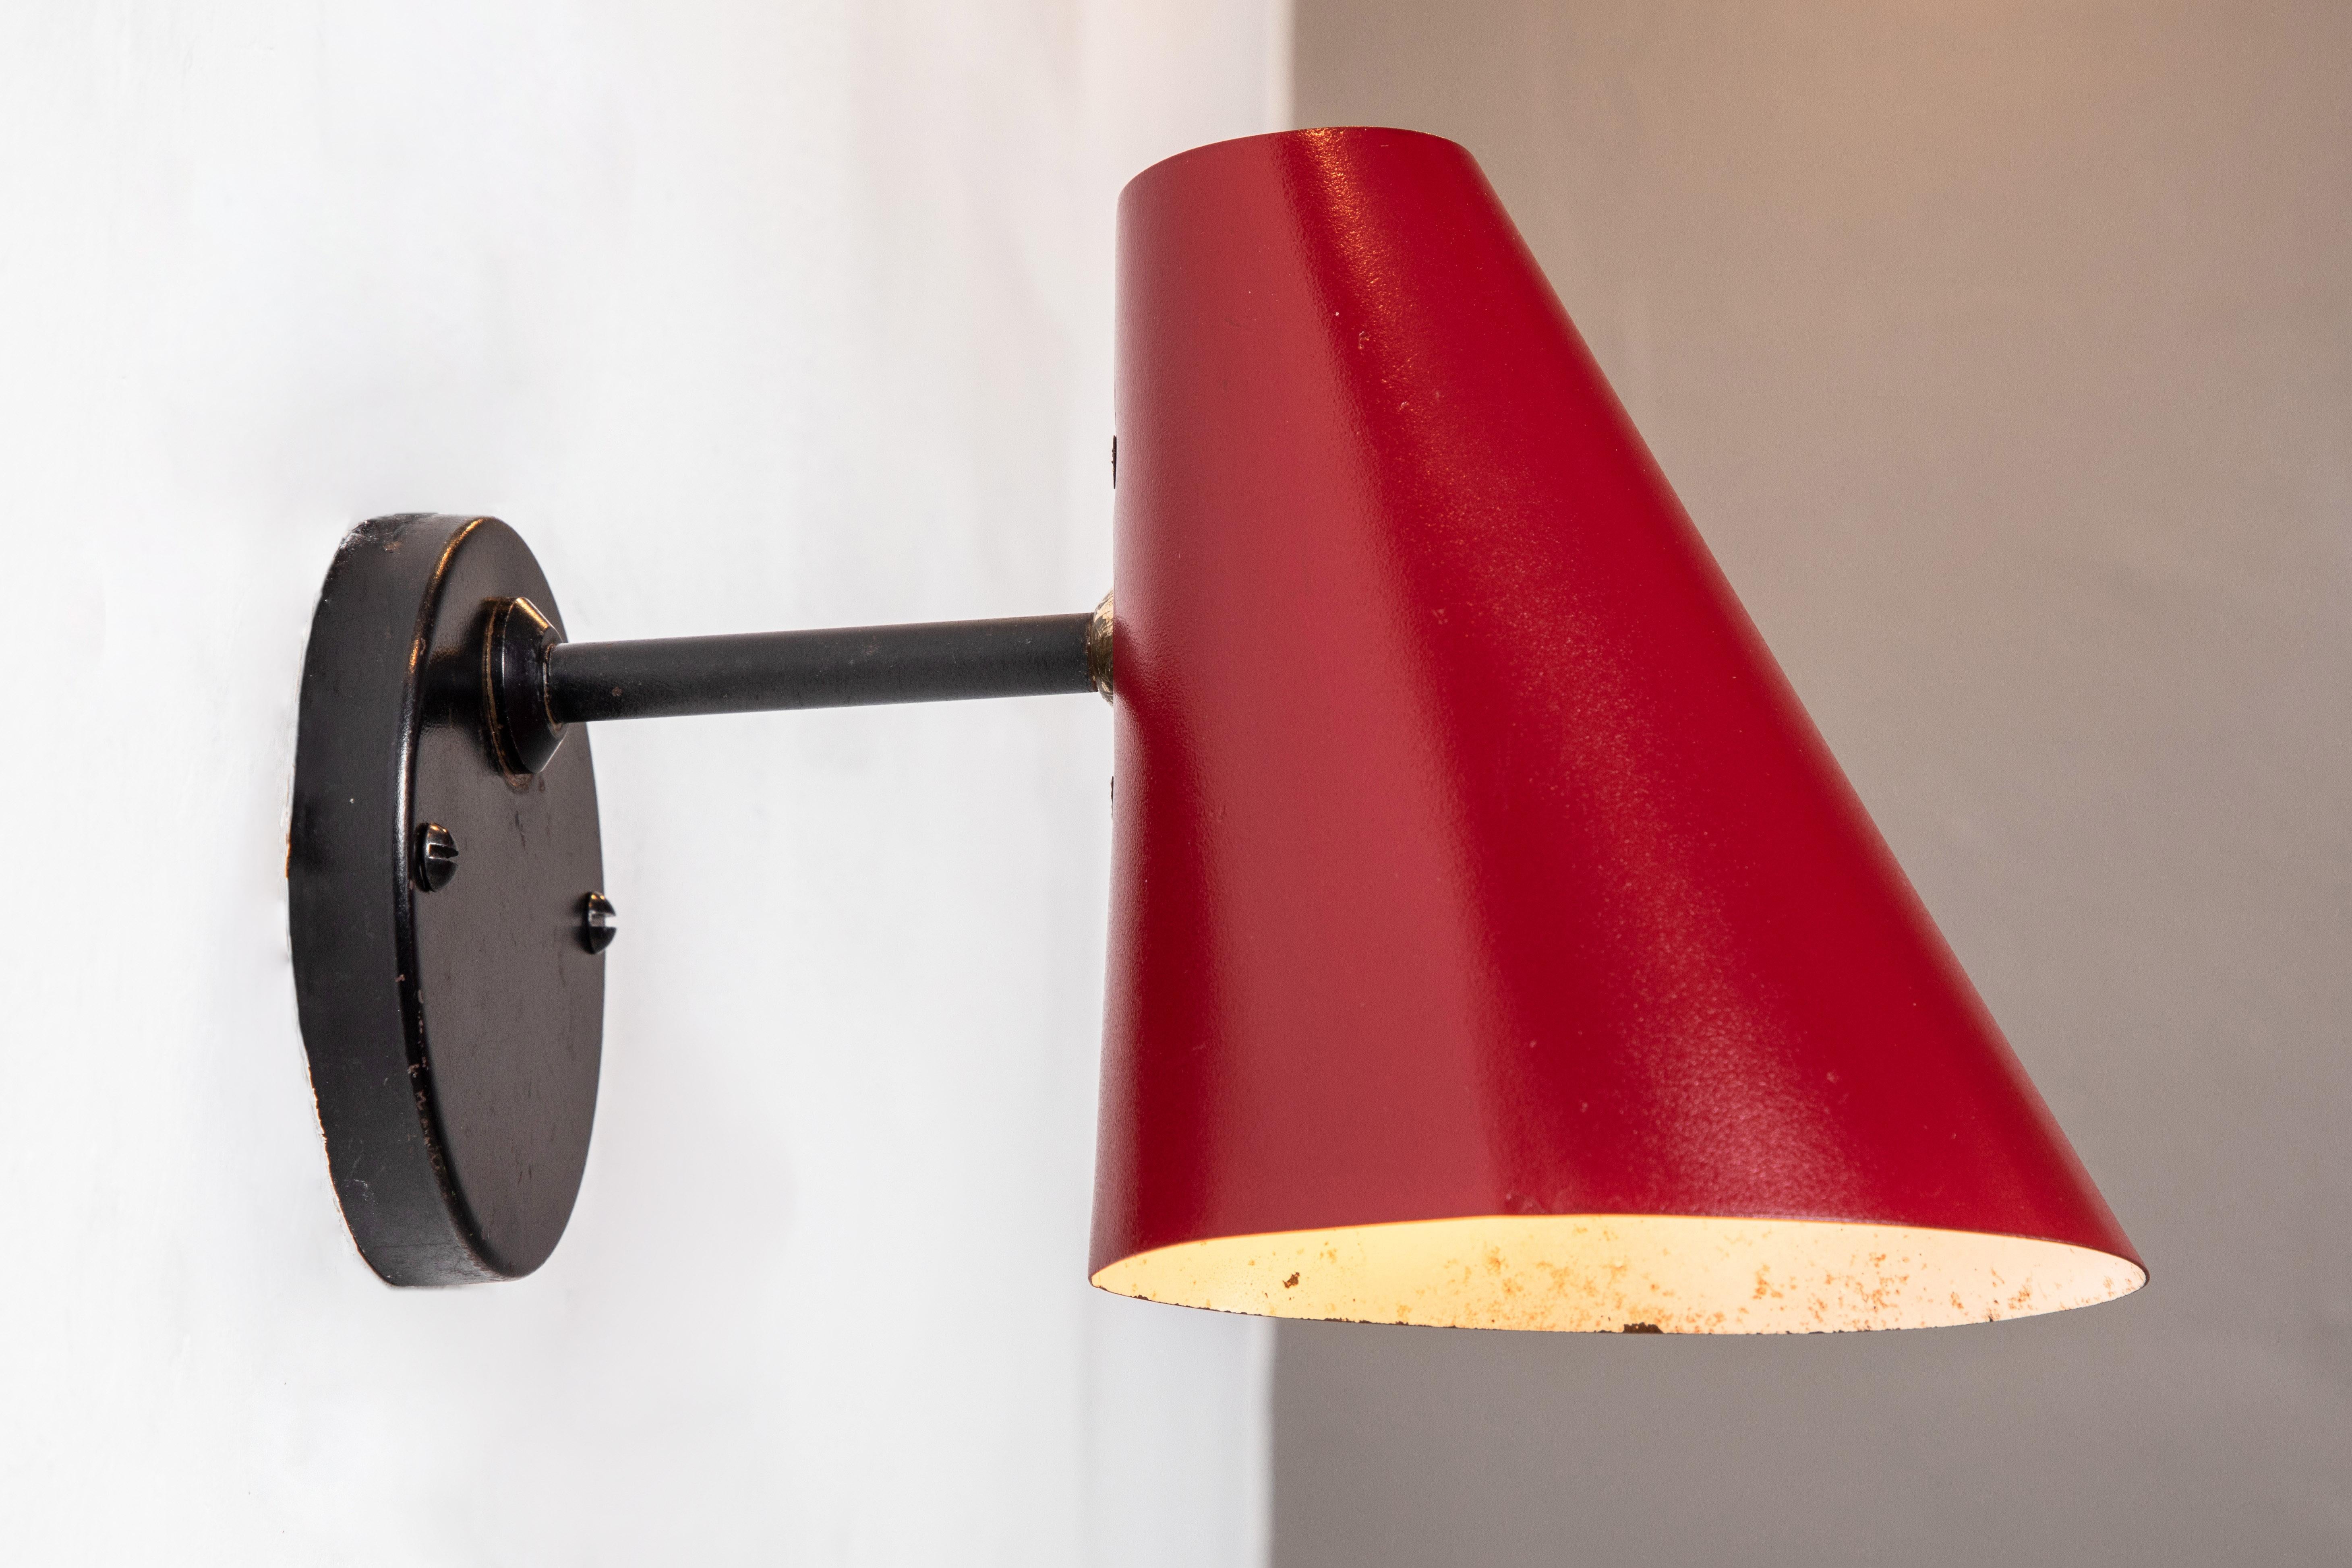 Pair of 1950s Jacques Biny Red & black wall lights. A exceptionally clean and simple design executed in red and black painted metal. Lamps rotate freely on adjustable swivel. Quintessentially midcentury French in its conception and